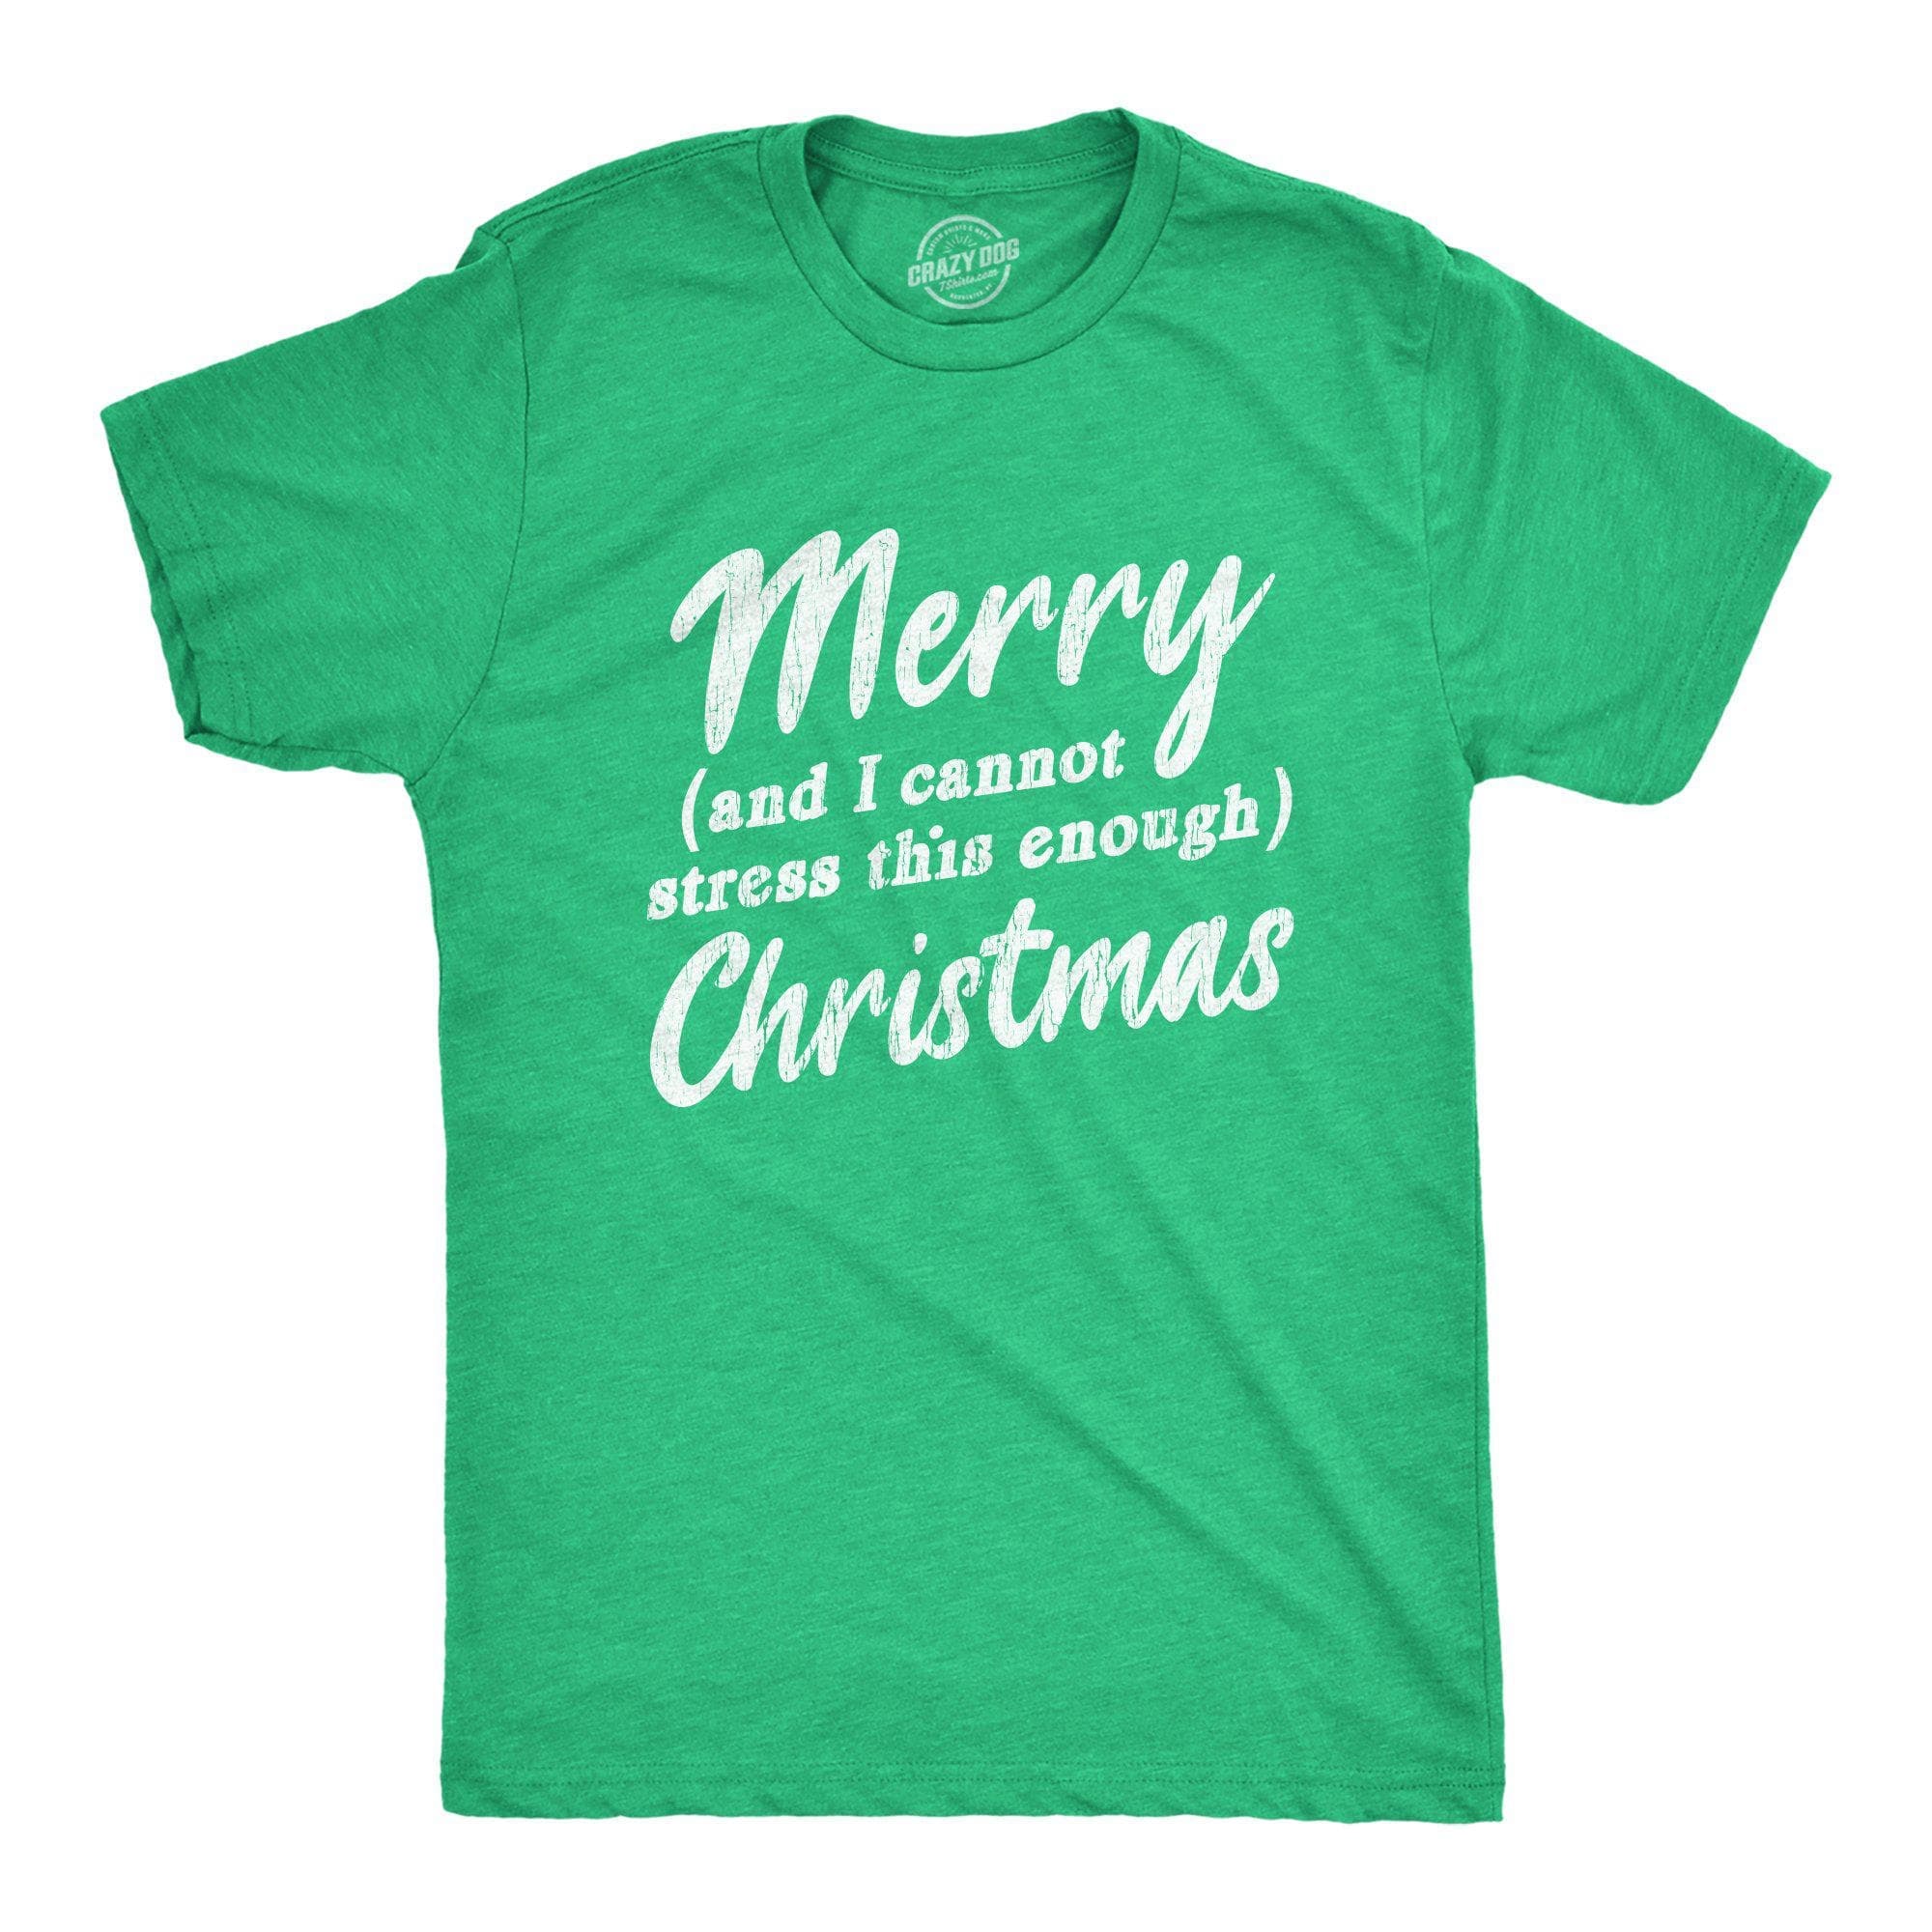 Merry And I Cannot Stress This Enough Christmas Men's Tshirt - Crazy Dog T-Shirts